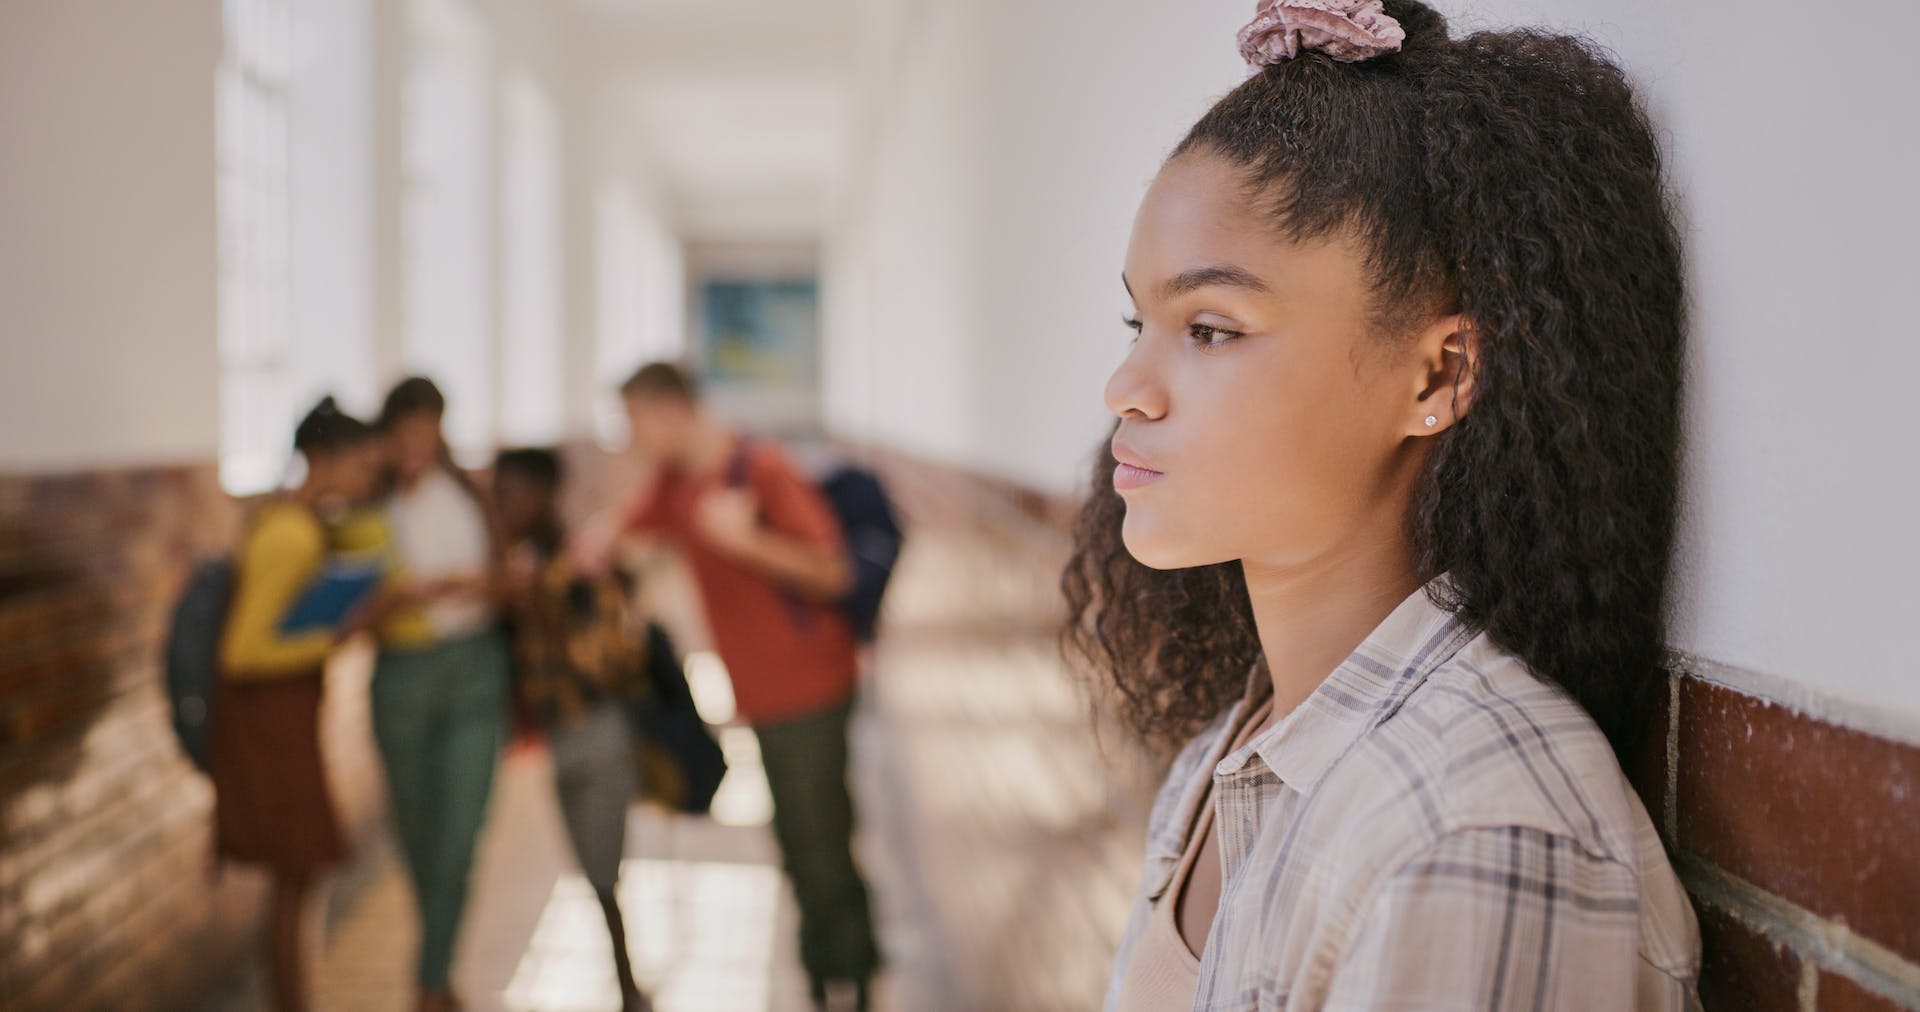 Why are bullies so mean? A youth psychology expert explains what’s behind their harmful behavior